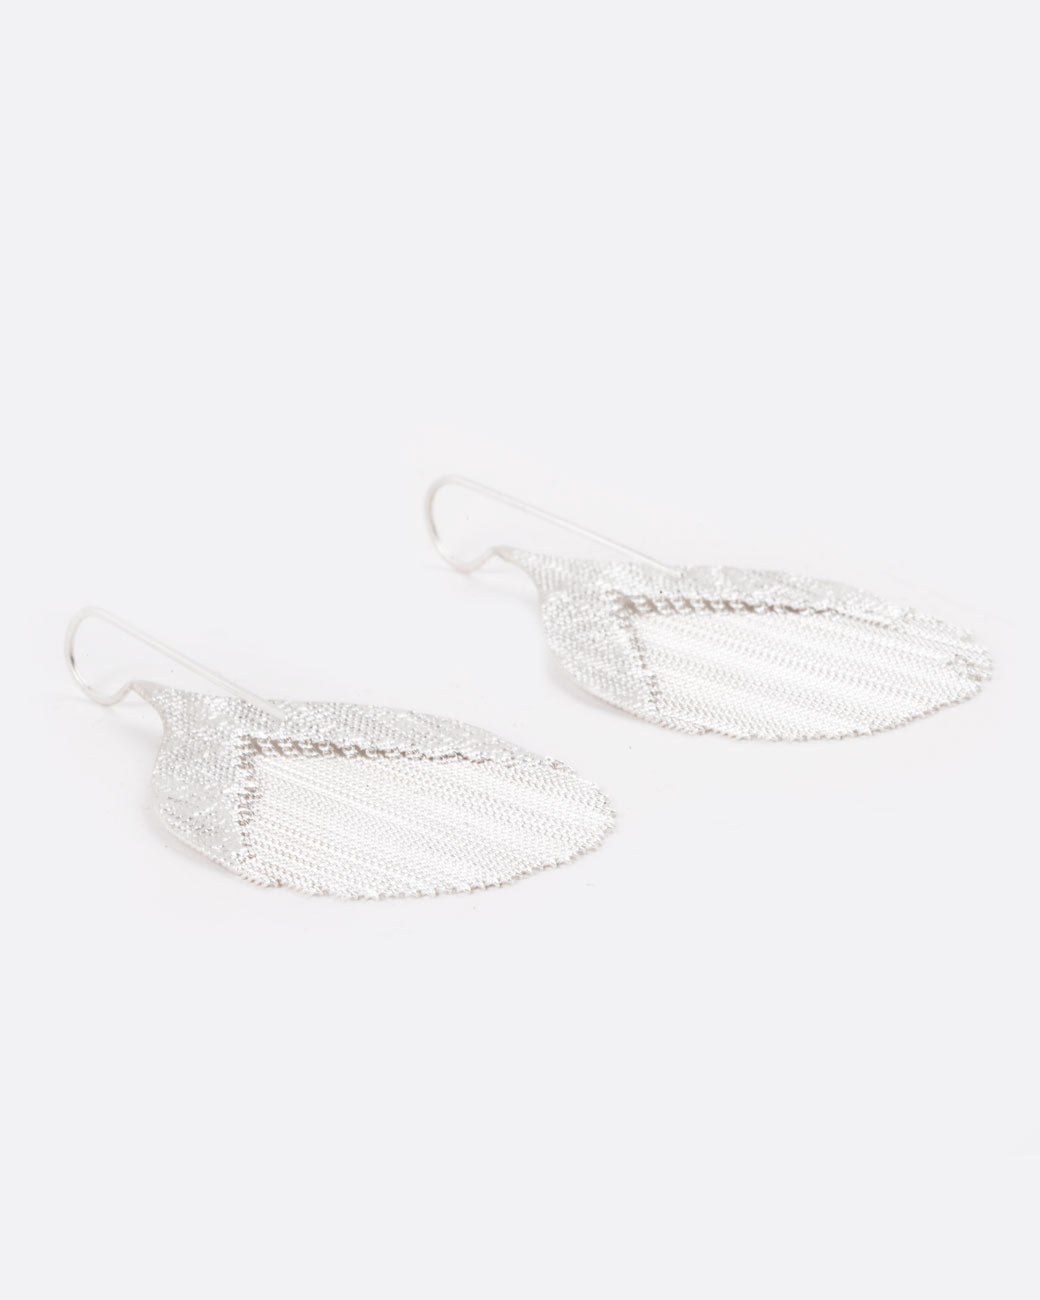 whale tail shaped earrings with a number of dangling chains in the middle